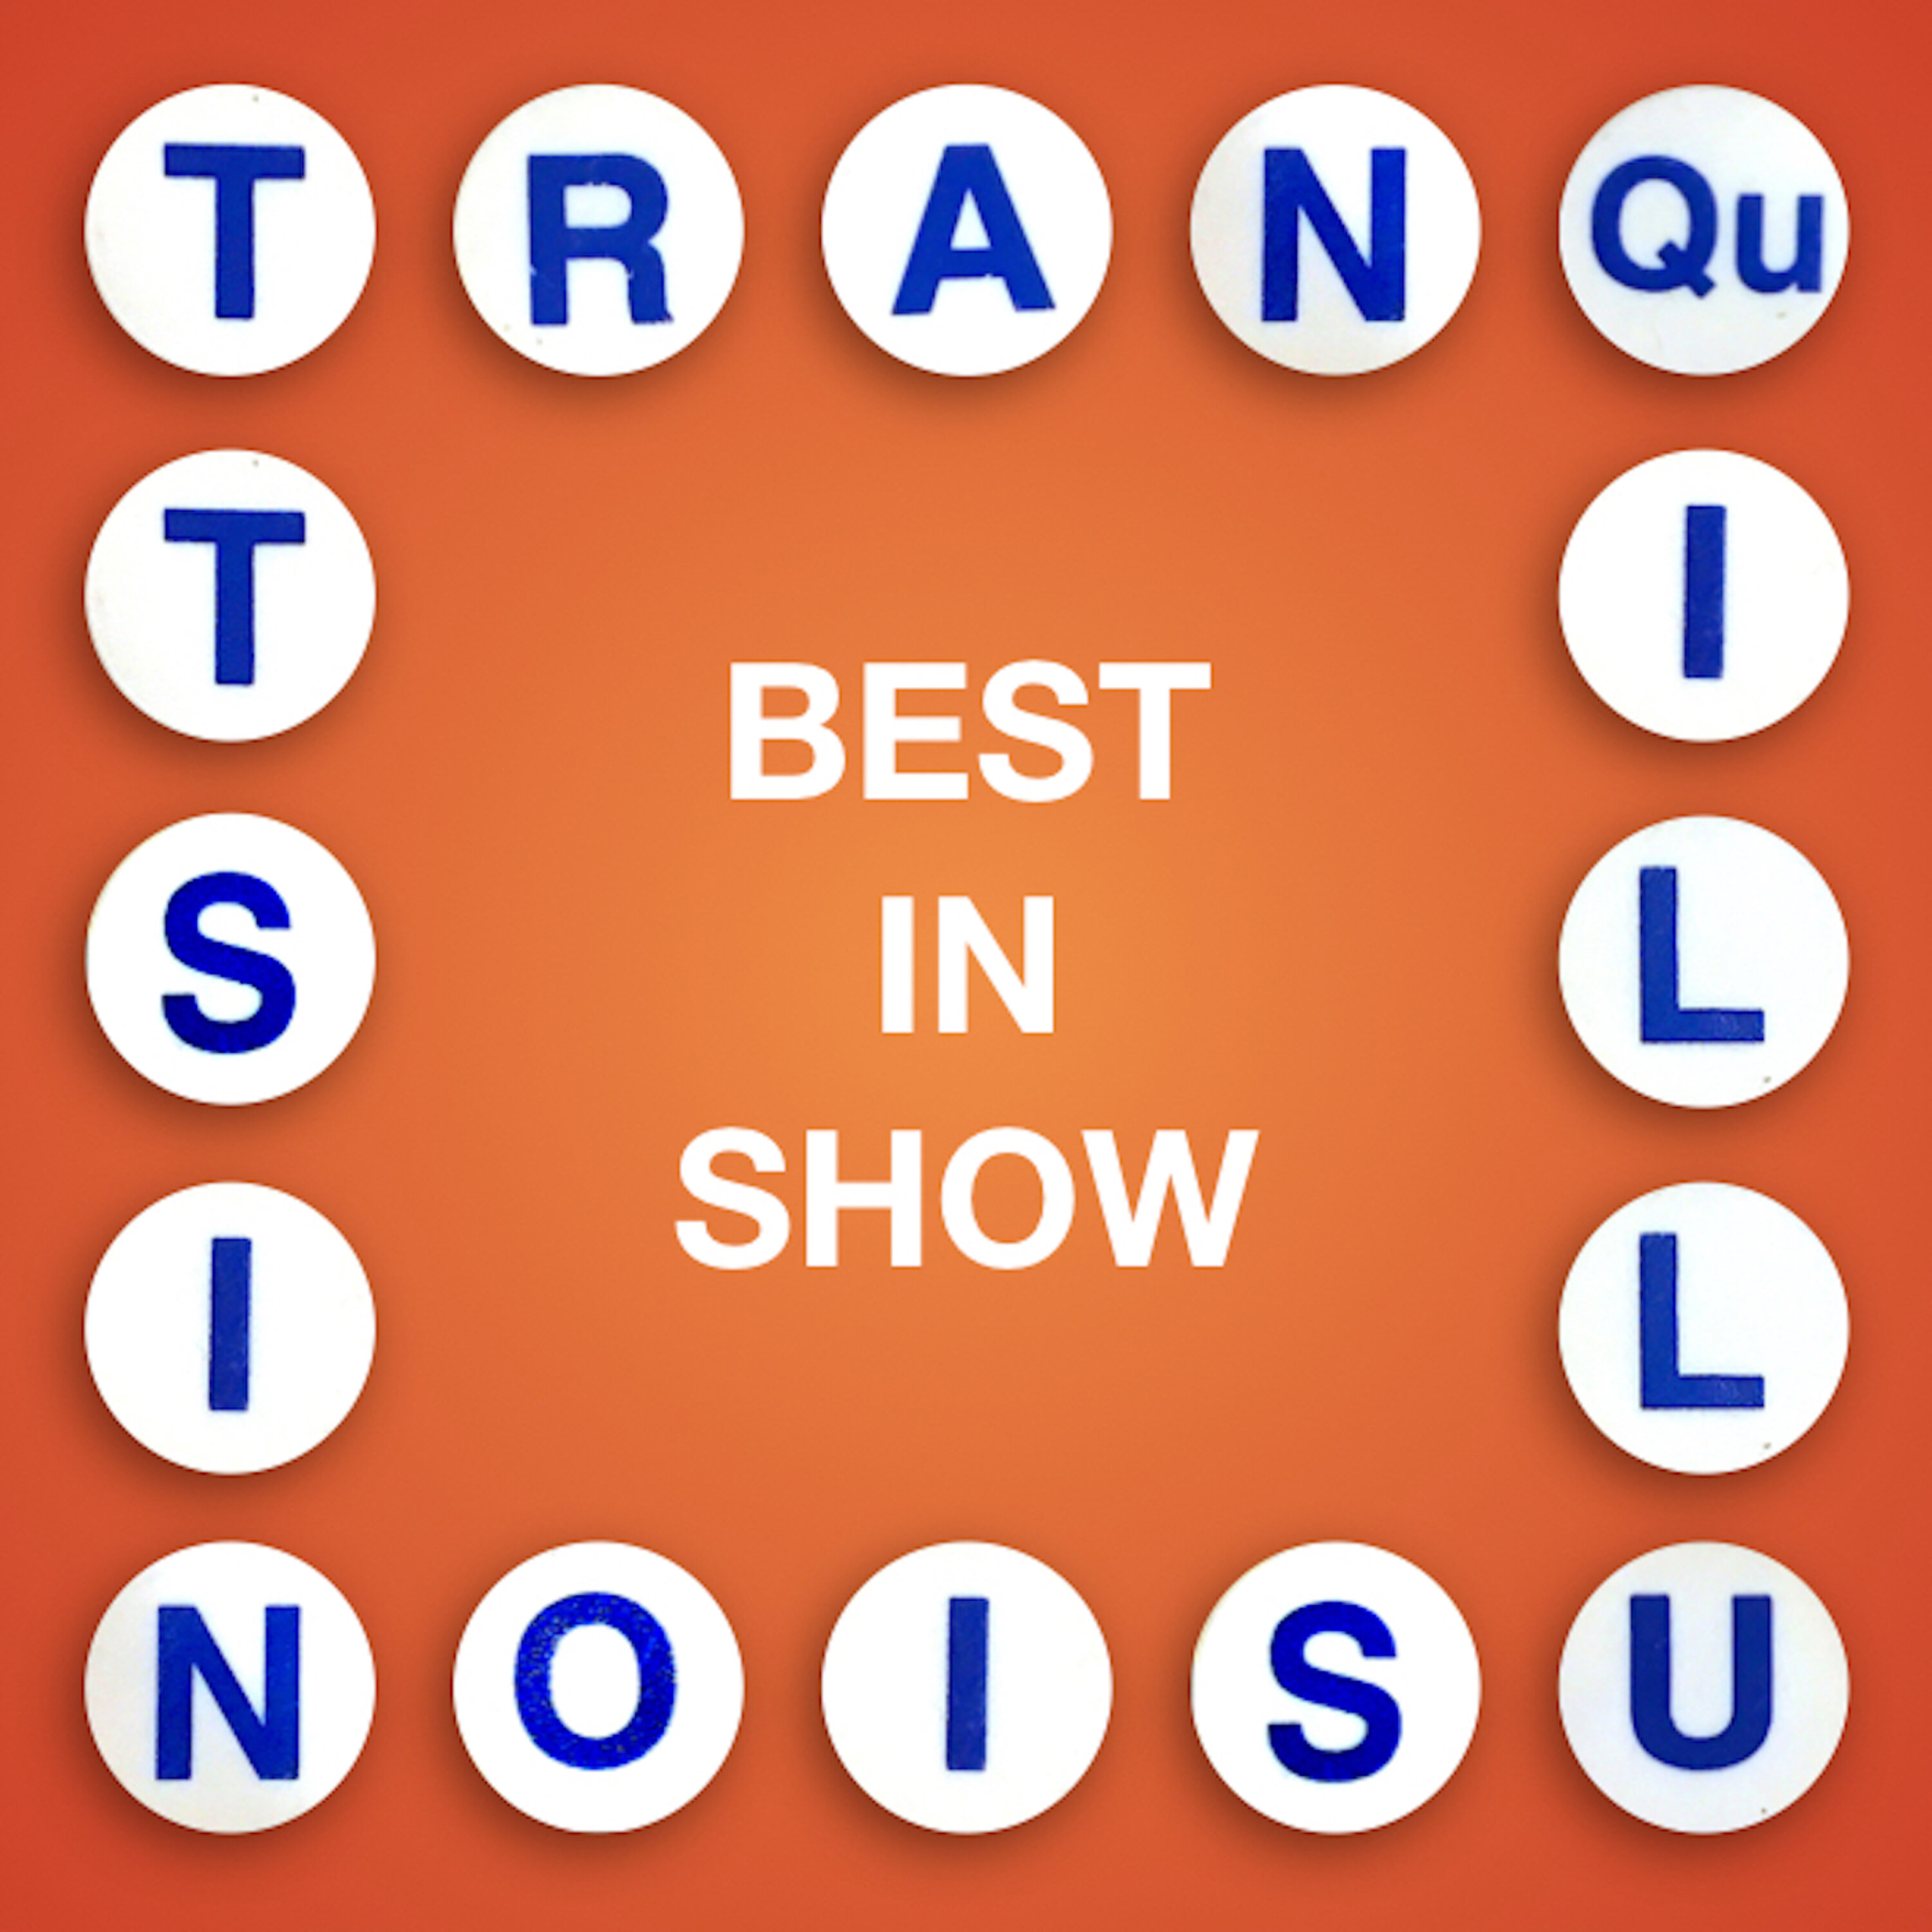 Thumbnail for "Tranquillusionist: Best In Show".